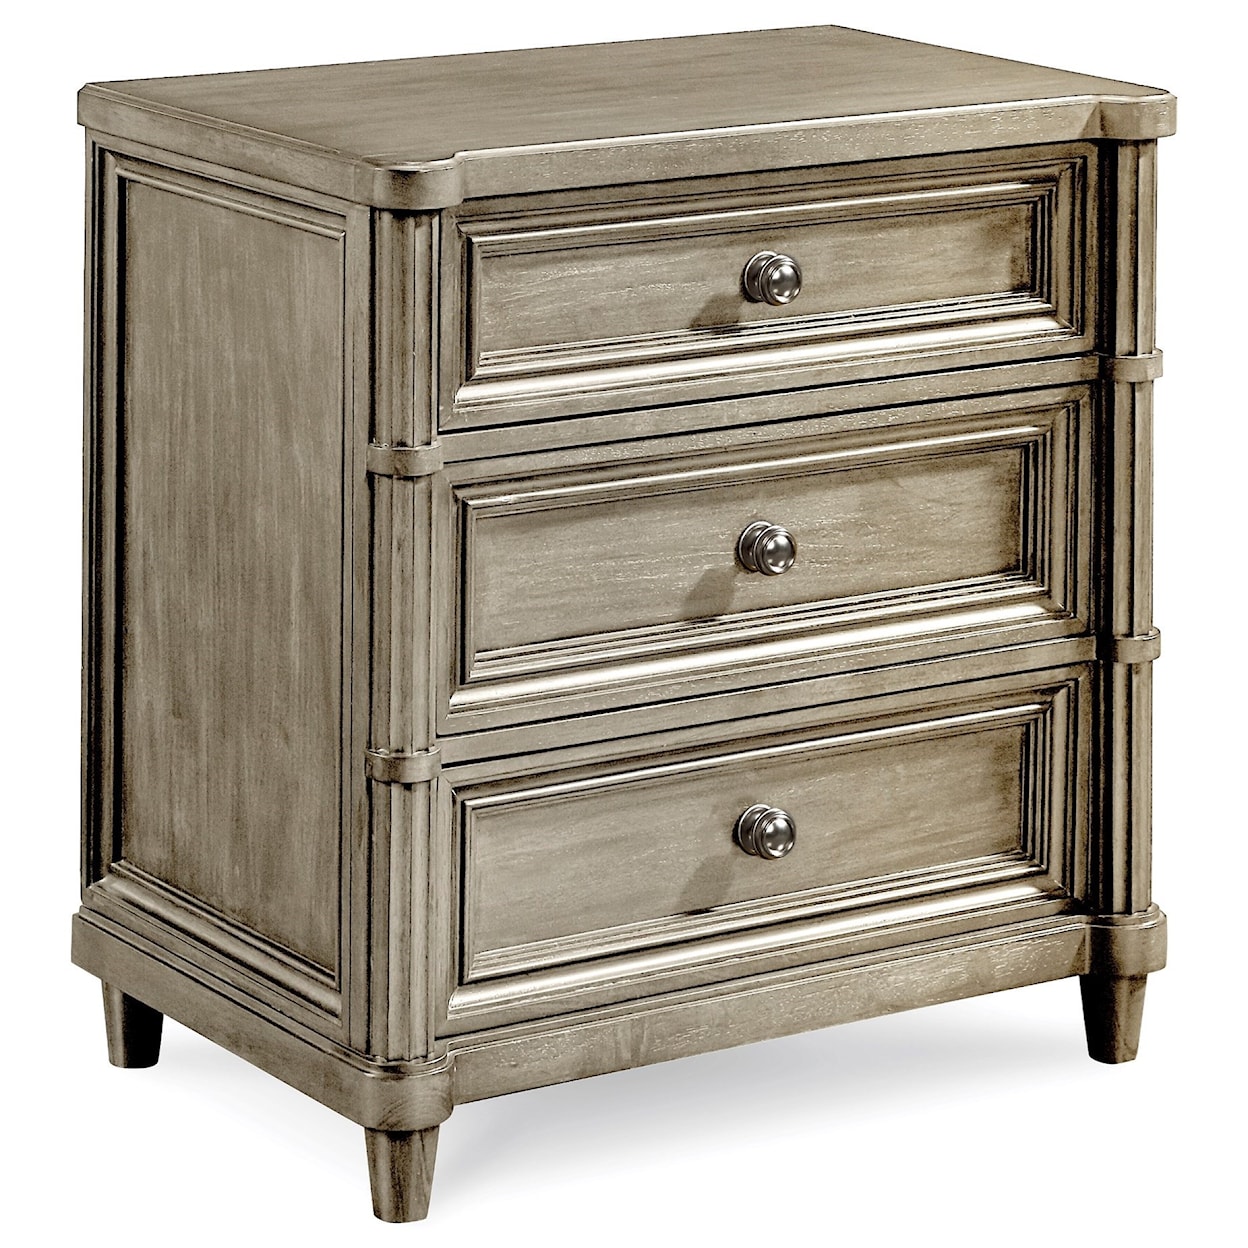 A.R.T. Furniture Inc Morrissey Eccles Nightstand